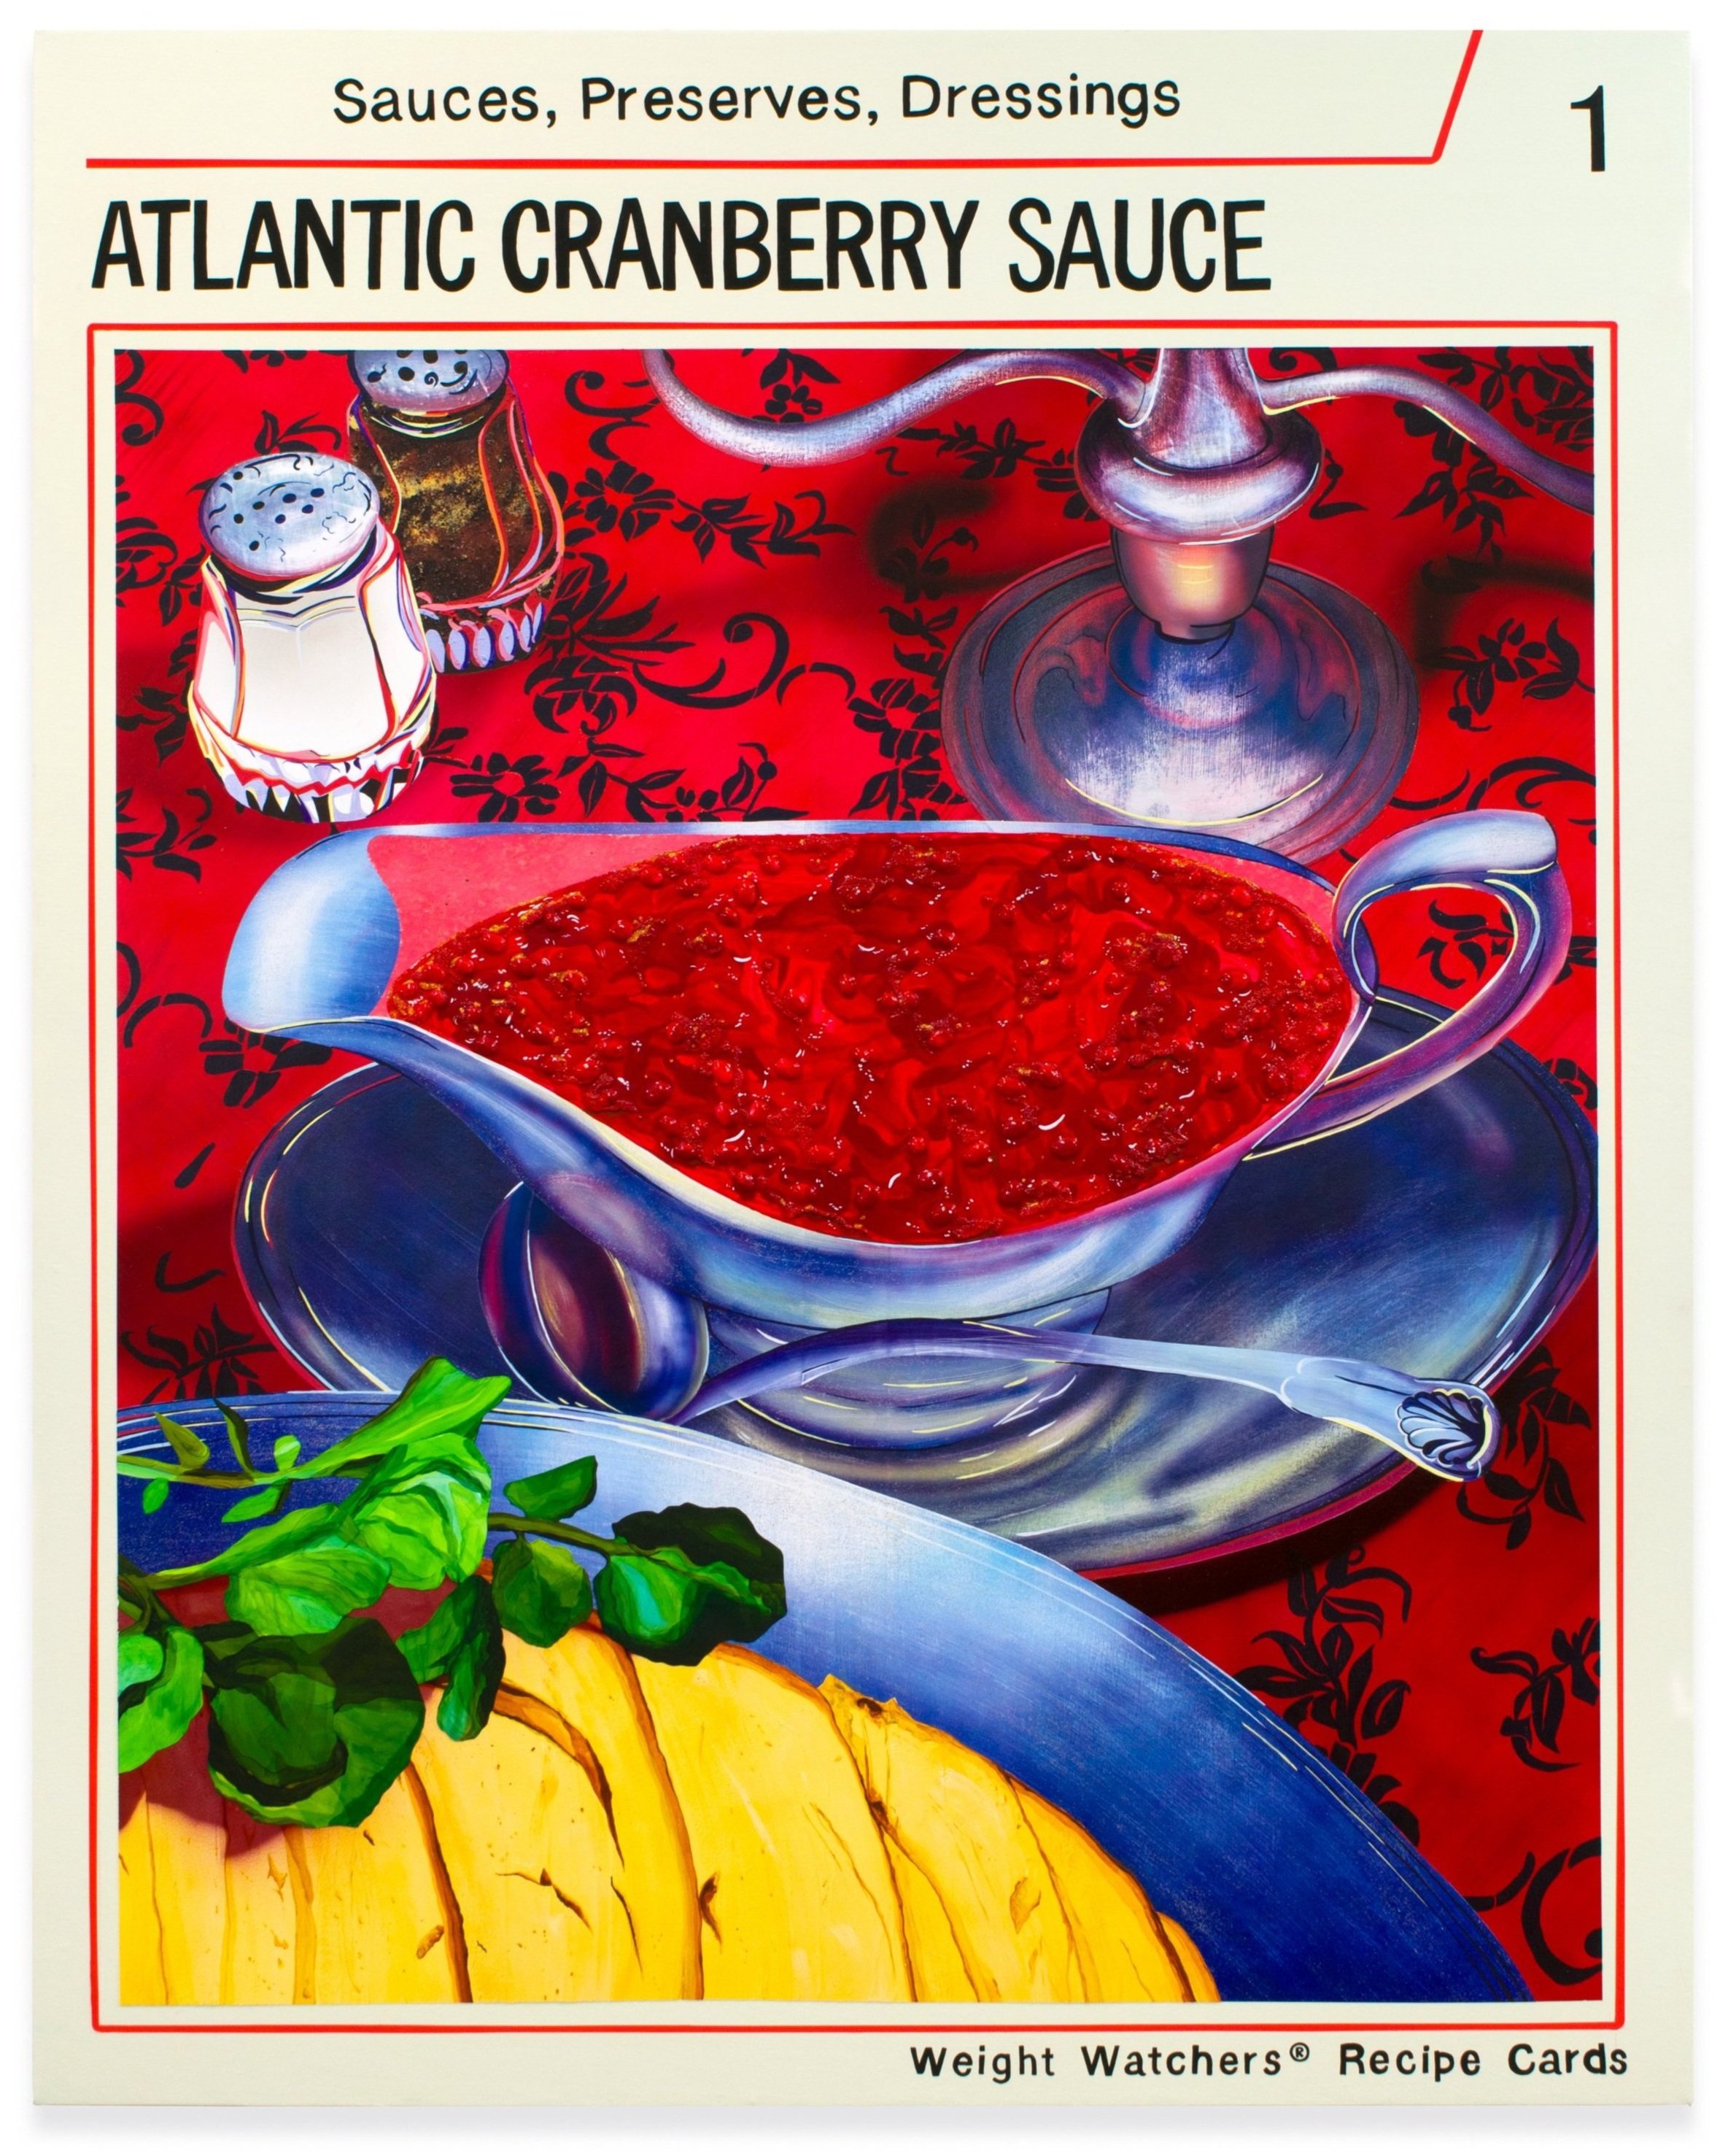 Atlantic Cranberry Sauce (courtesy of Weight Watchers)